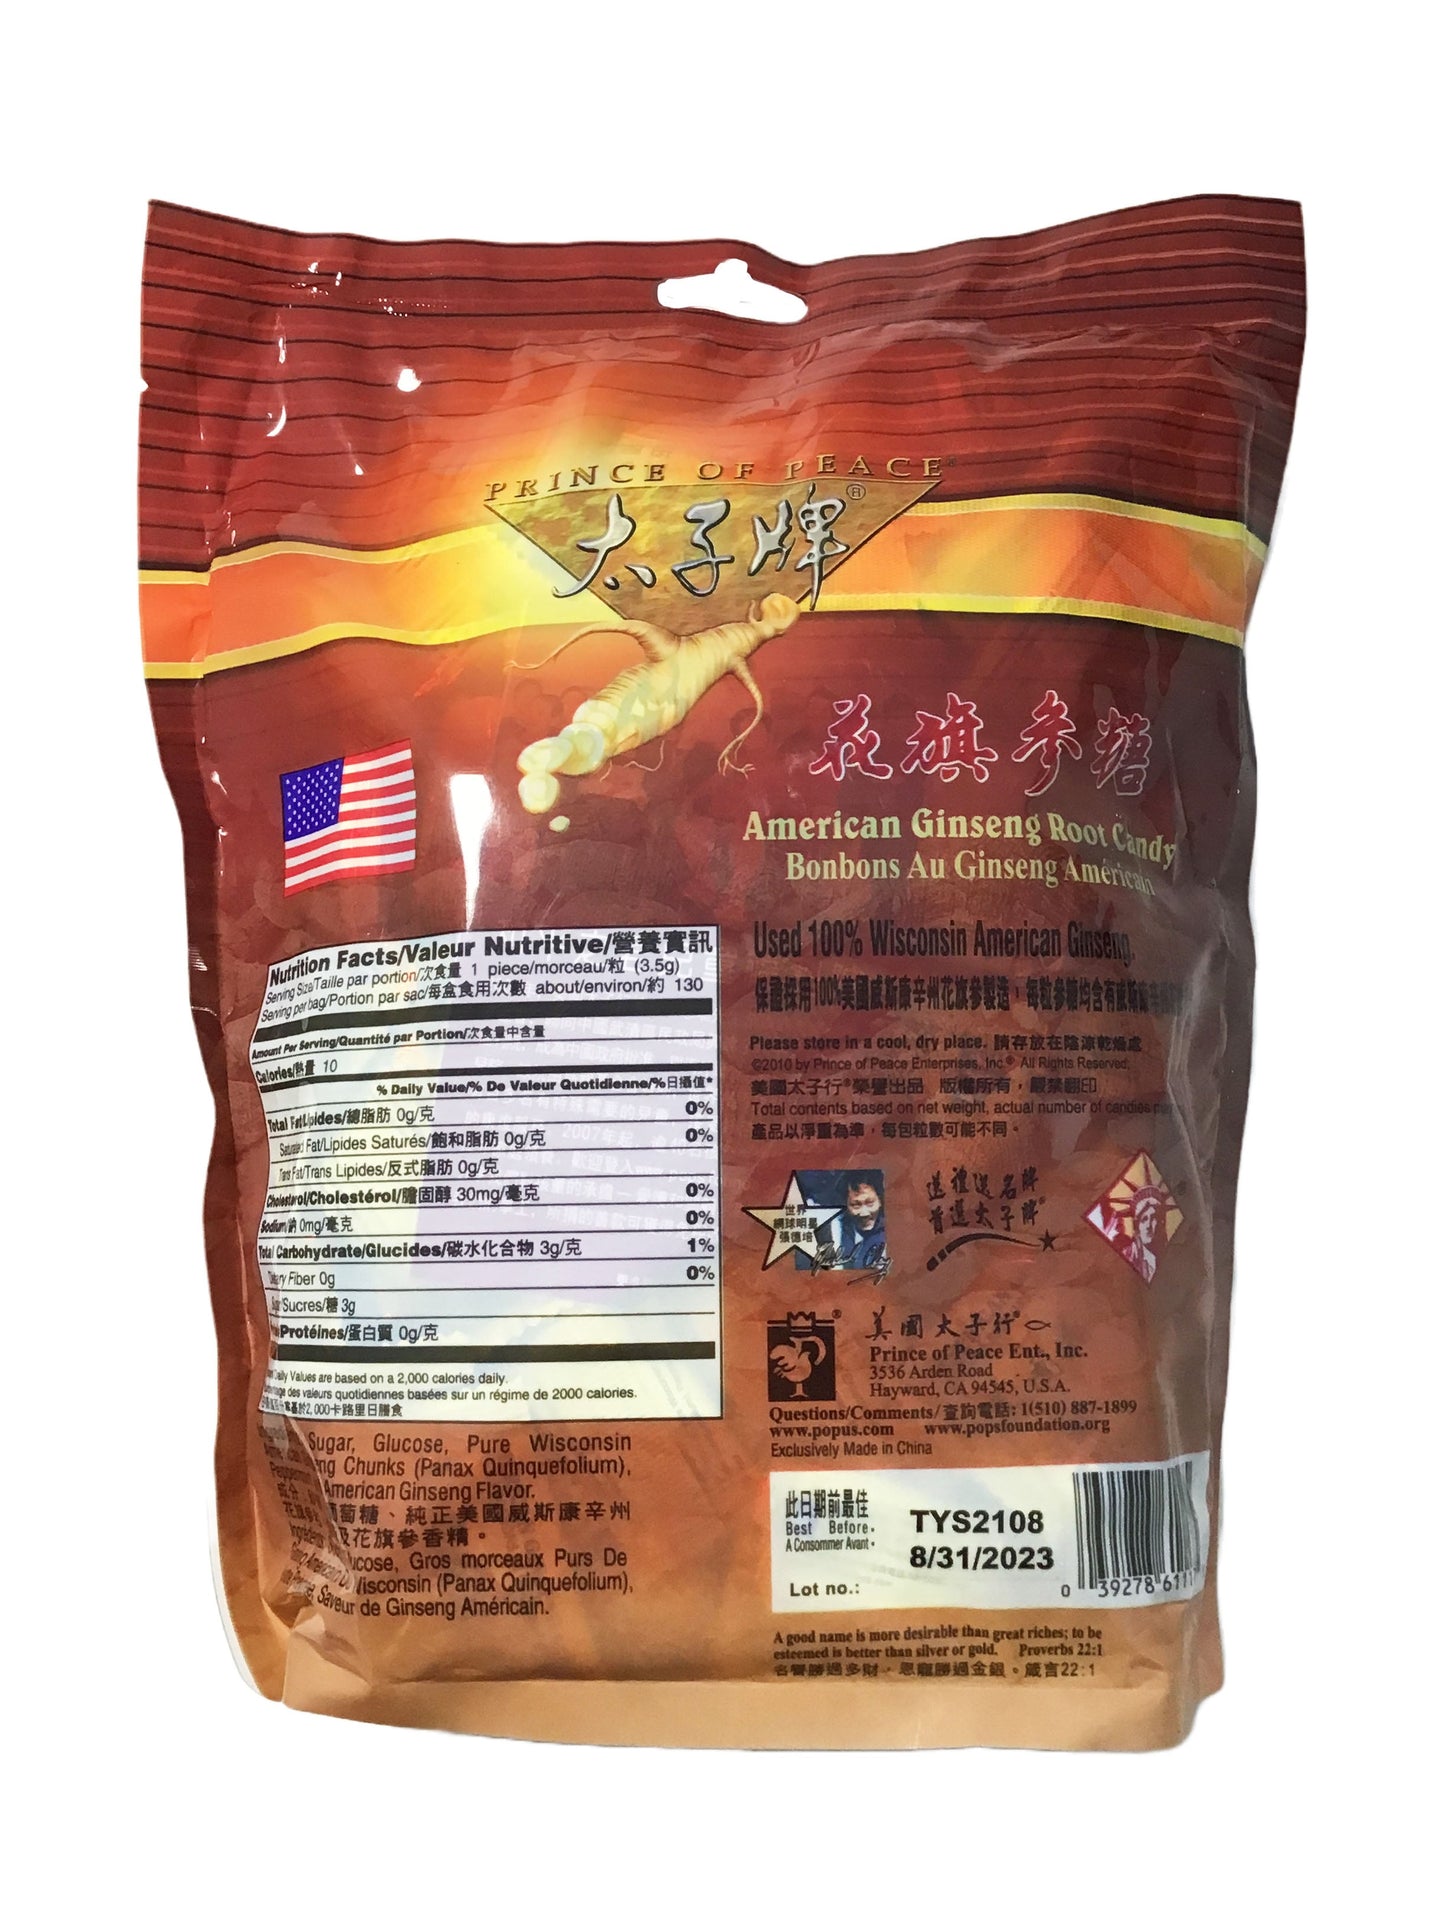 PRINCE OF PEACE American Ginseng Root Candy (454g) 16oz 太子牌 美国花旗参糖